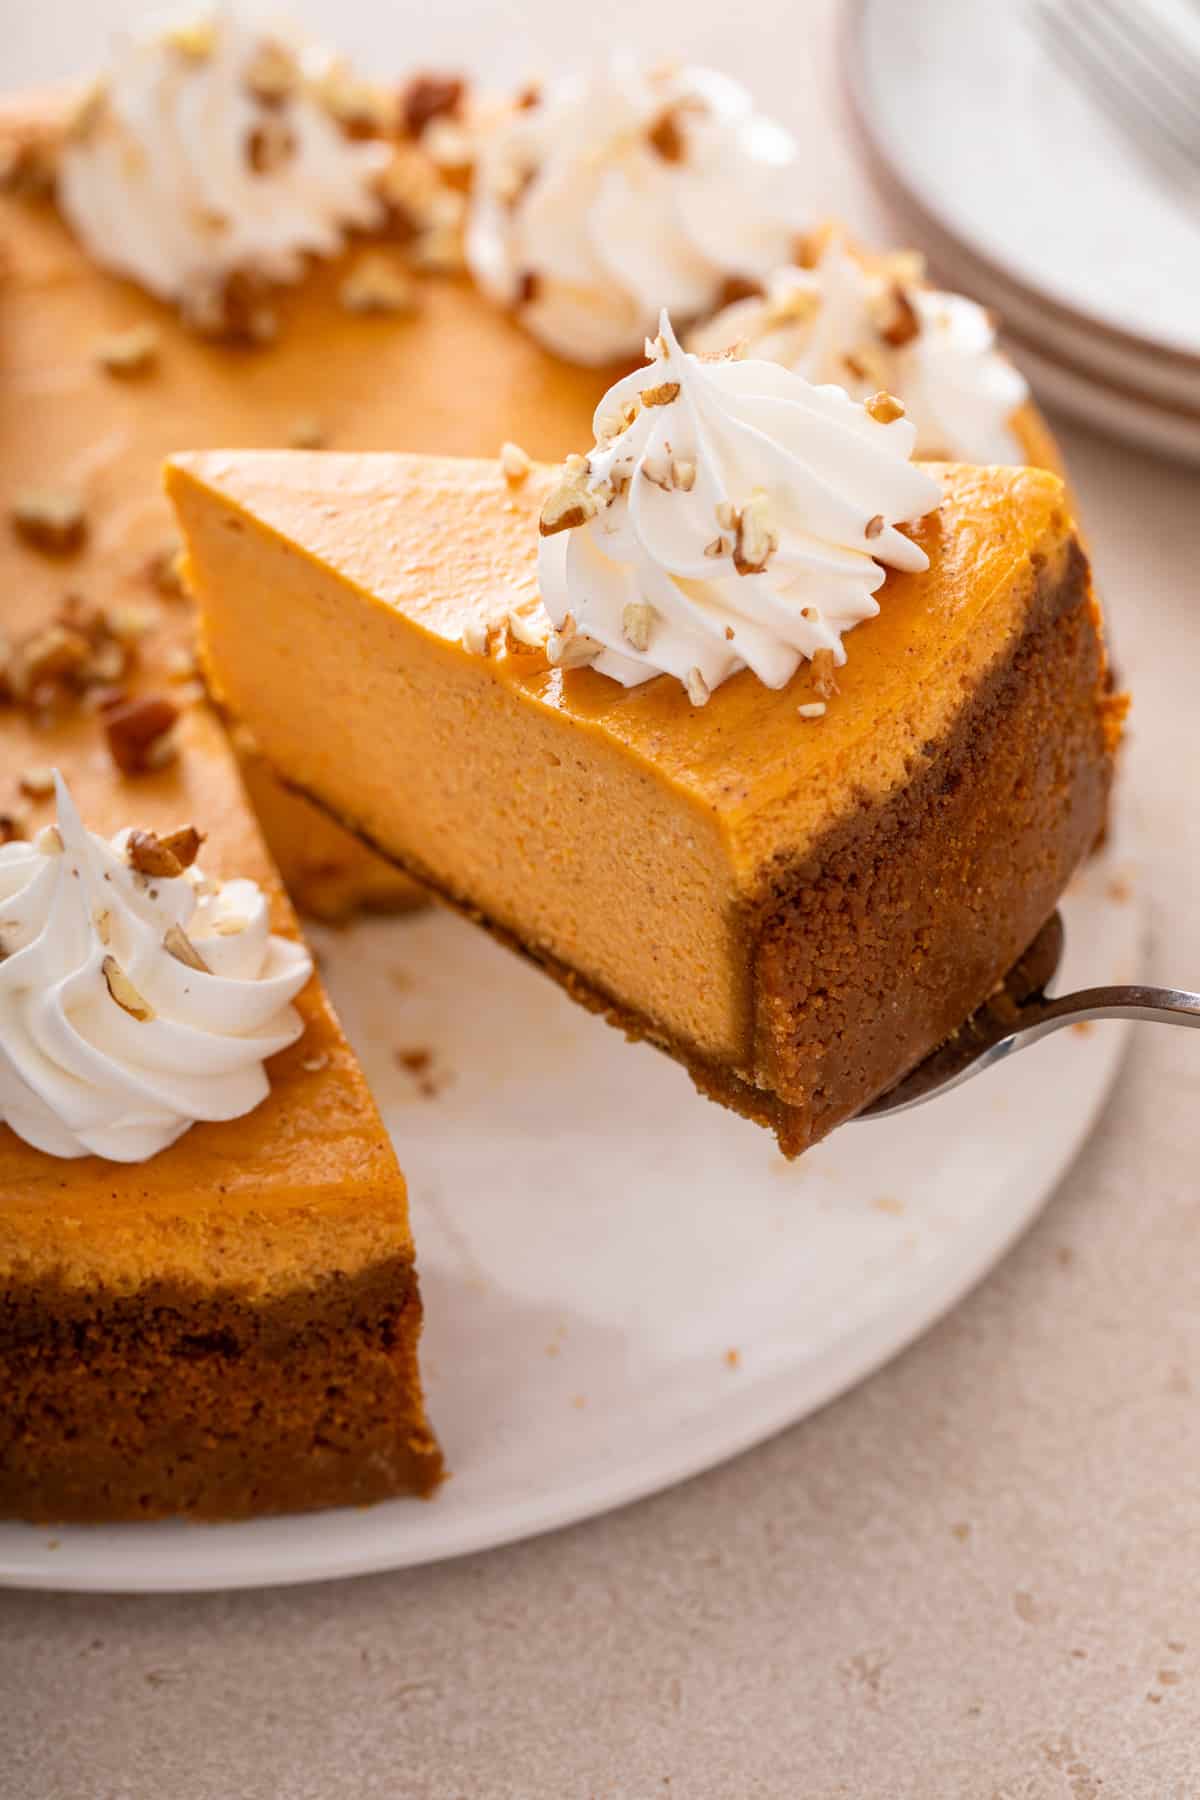 Cake server lifting a slice of sweet potato cheesecake from a cake plate.